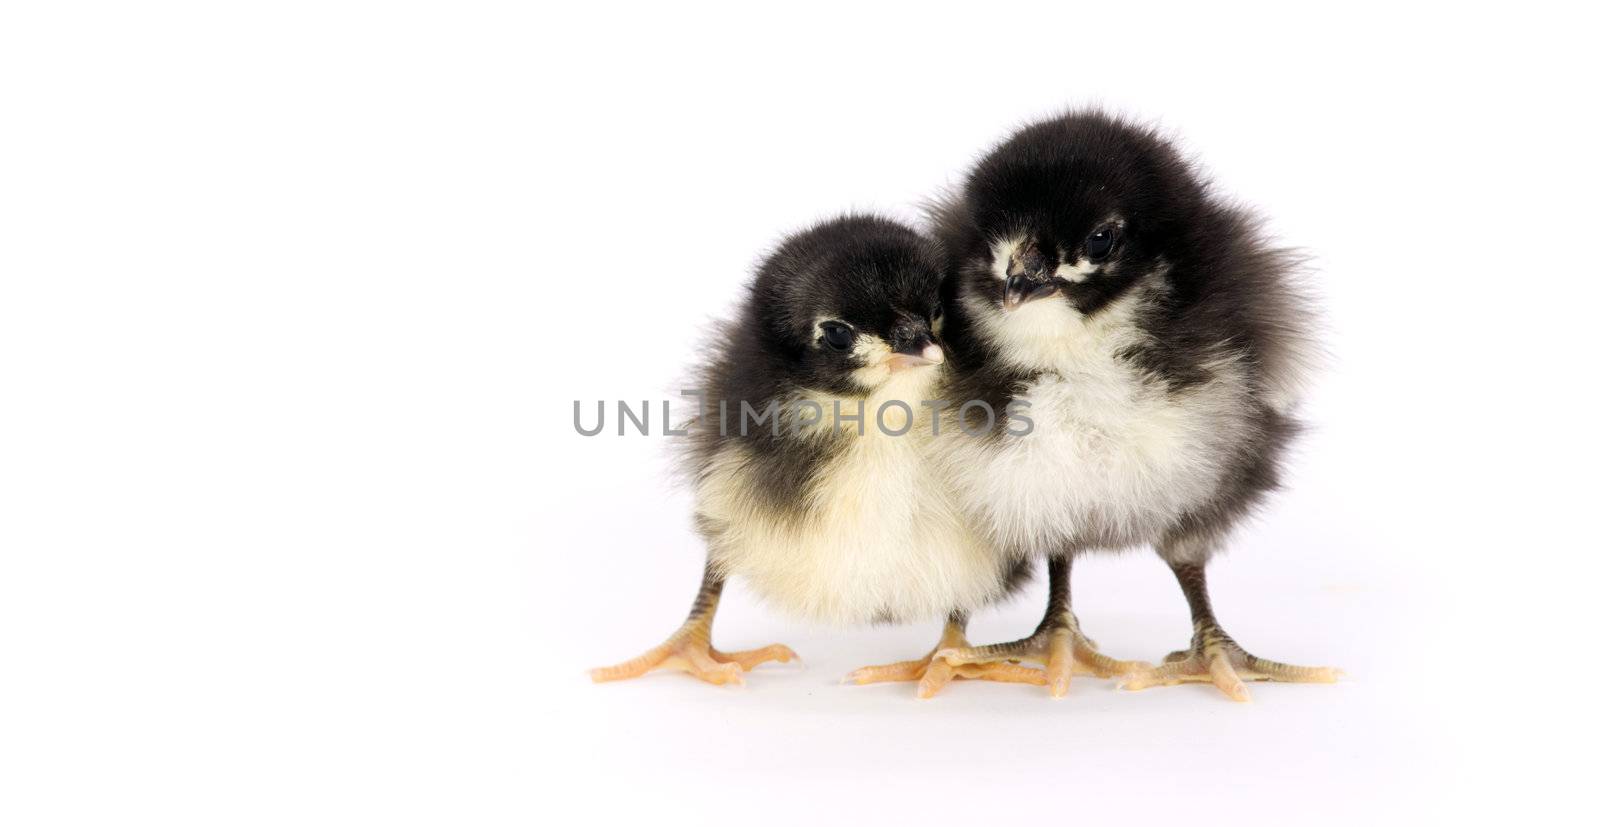 Two chicks of the Australorp Variety stand together on white